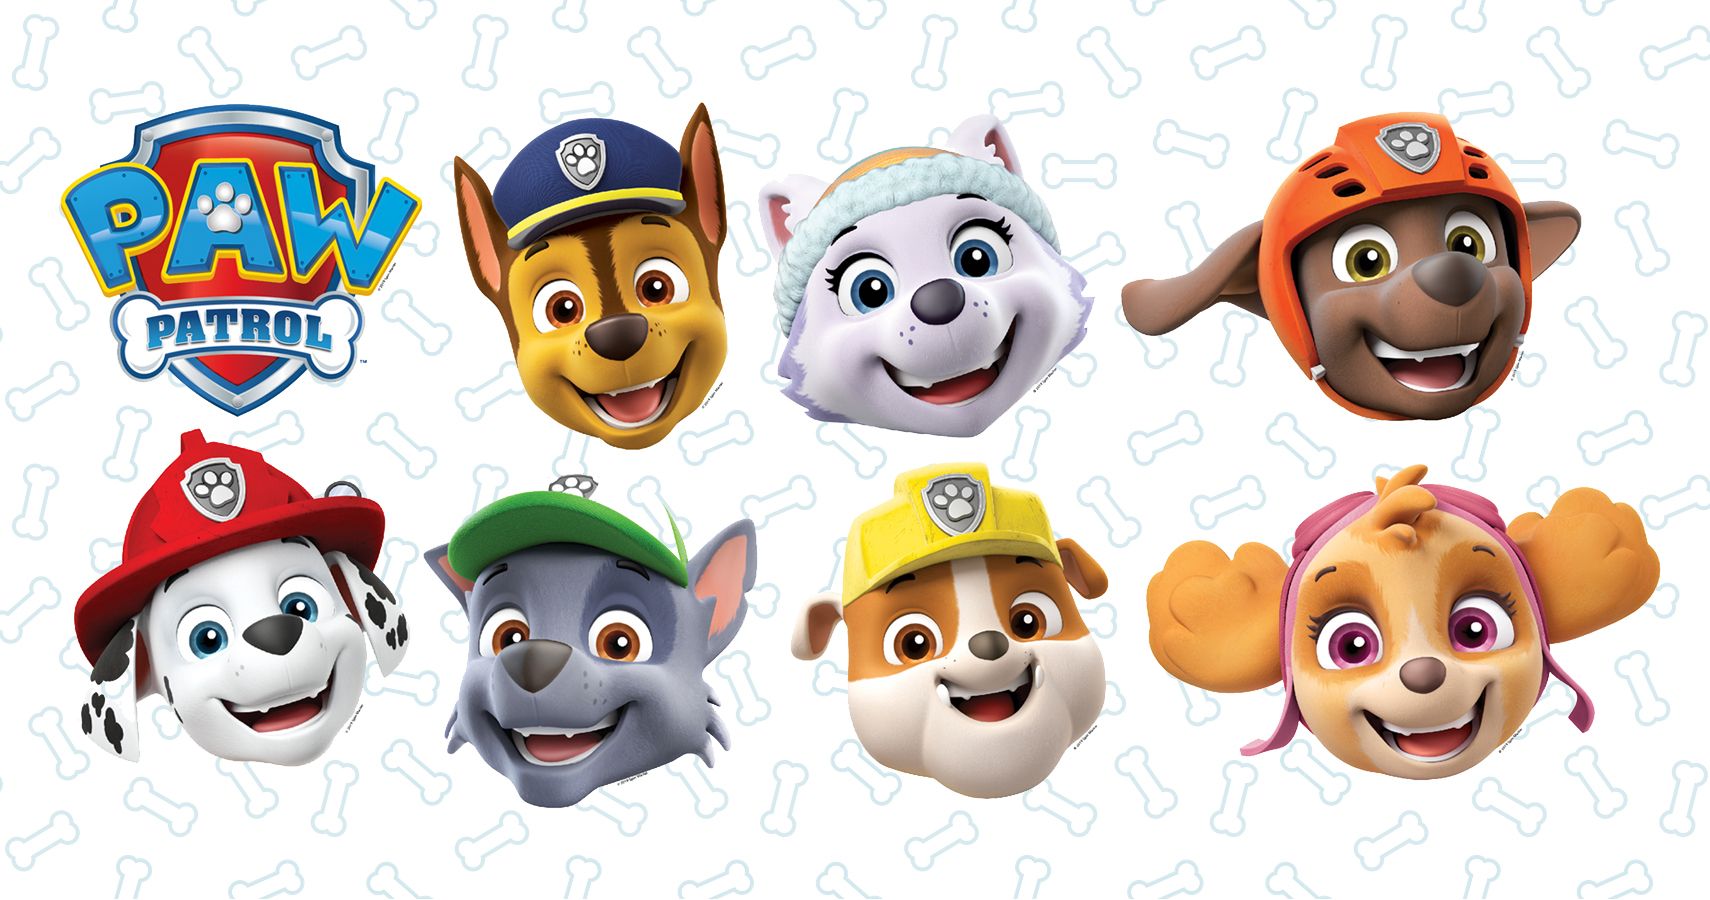 Paw Patrol Character Names, Explained